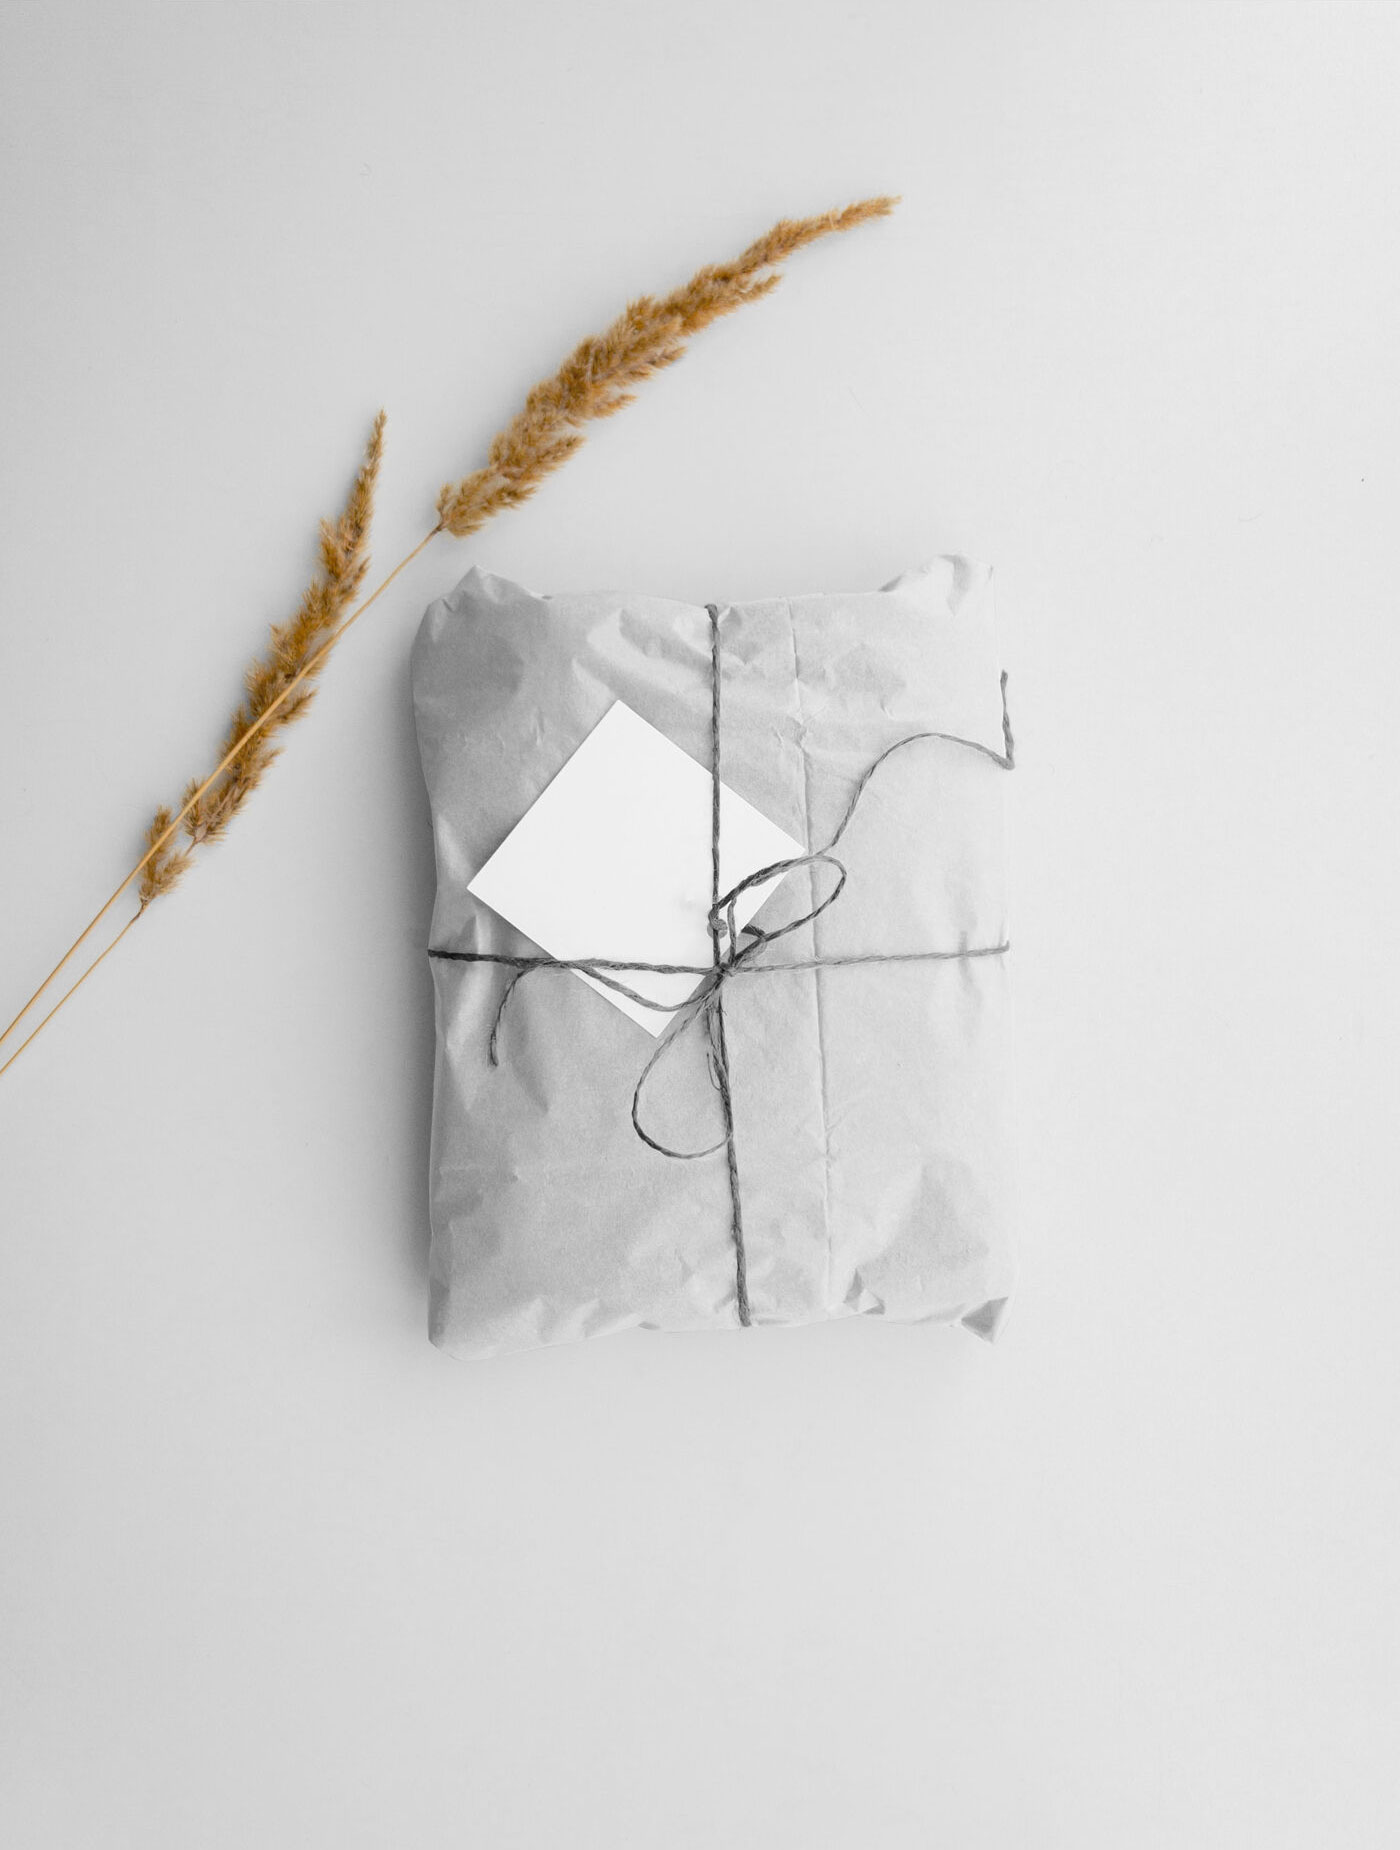 Gift Mockup with a Thread Bow FREE PSD